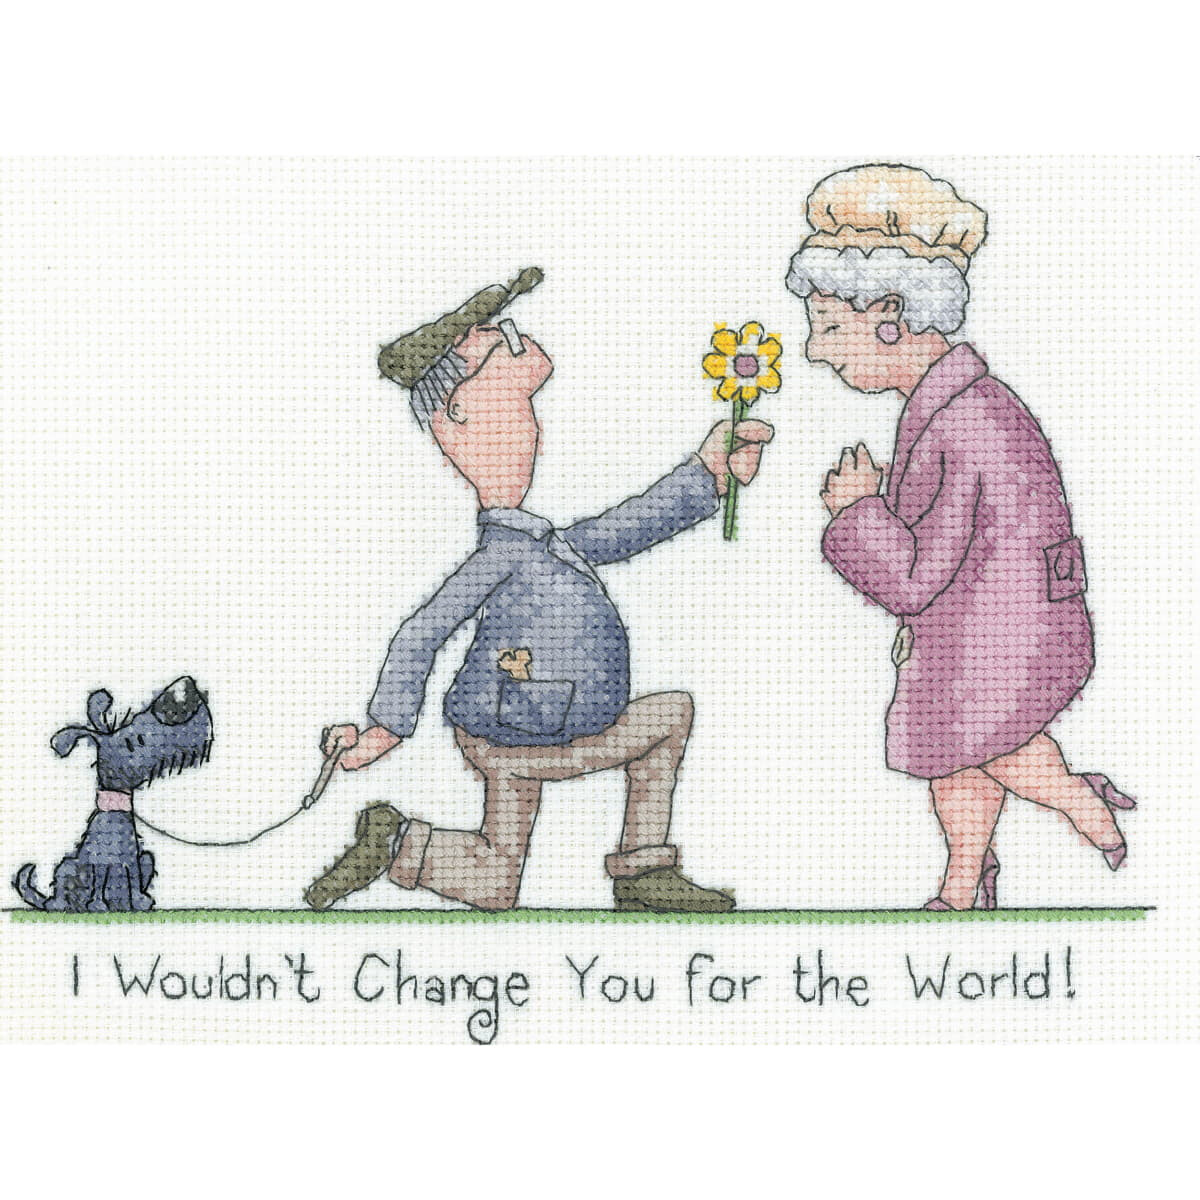 Heritage counted cross stitch kit Aida "I Wouldnt...